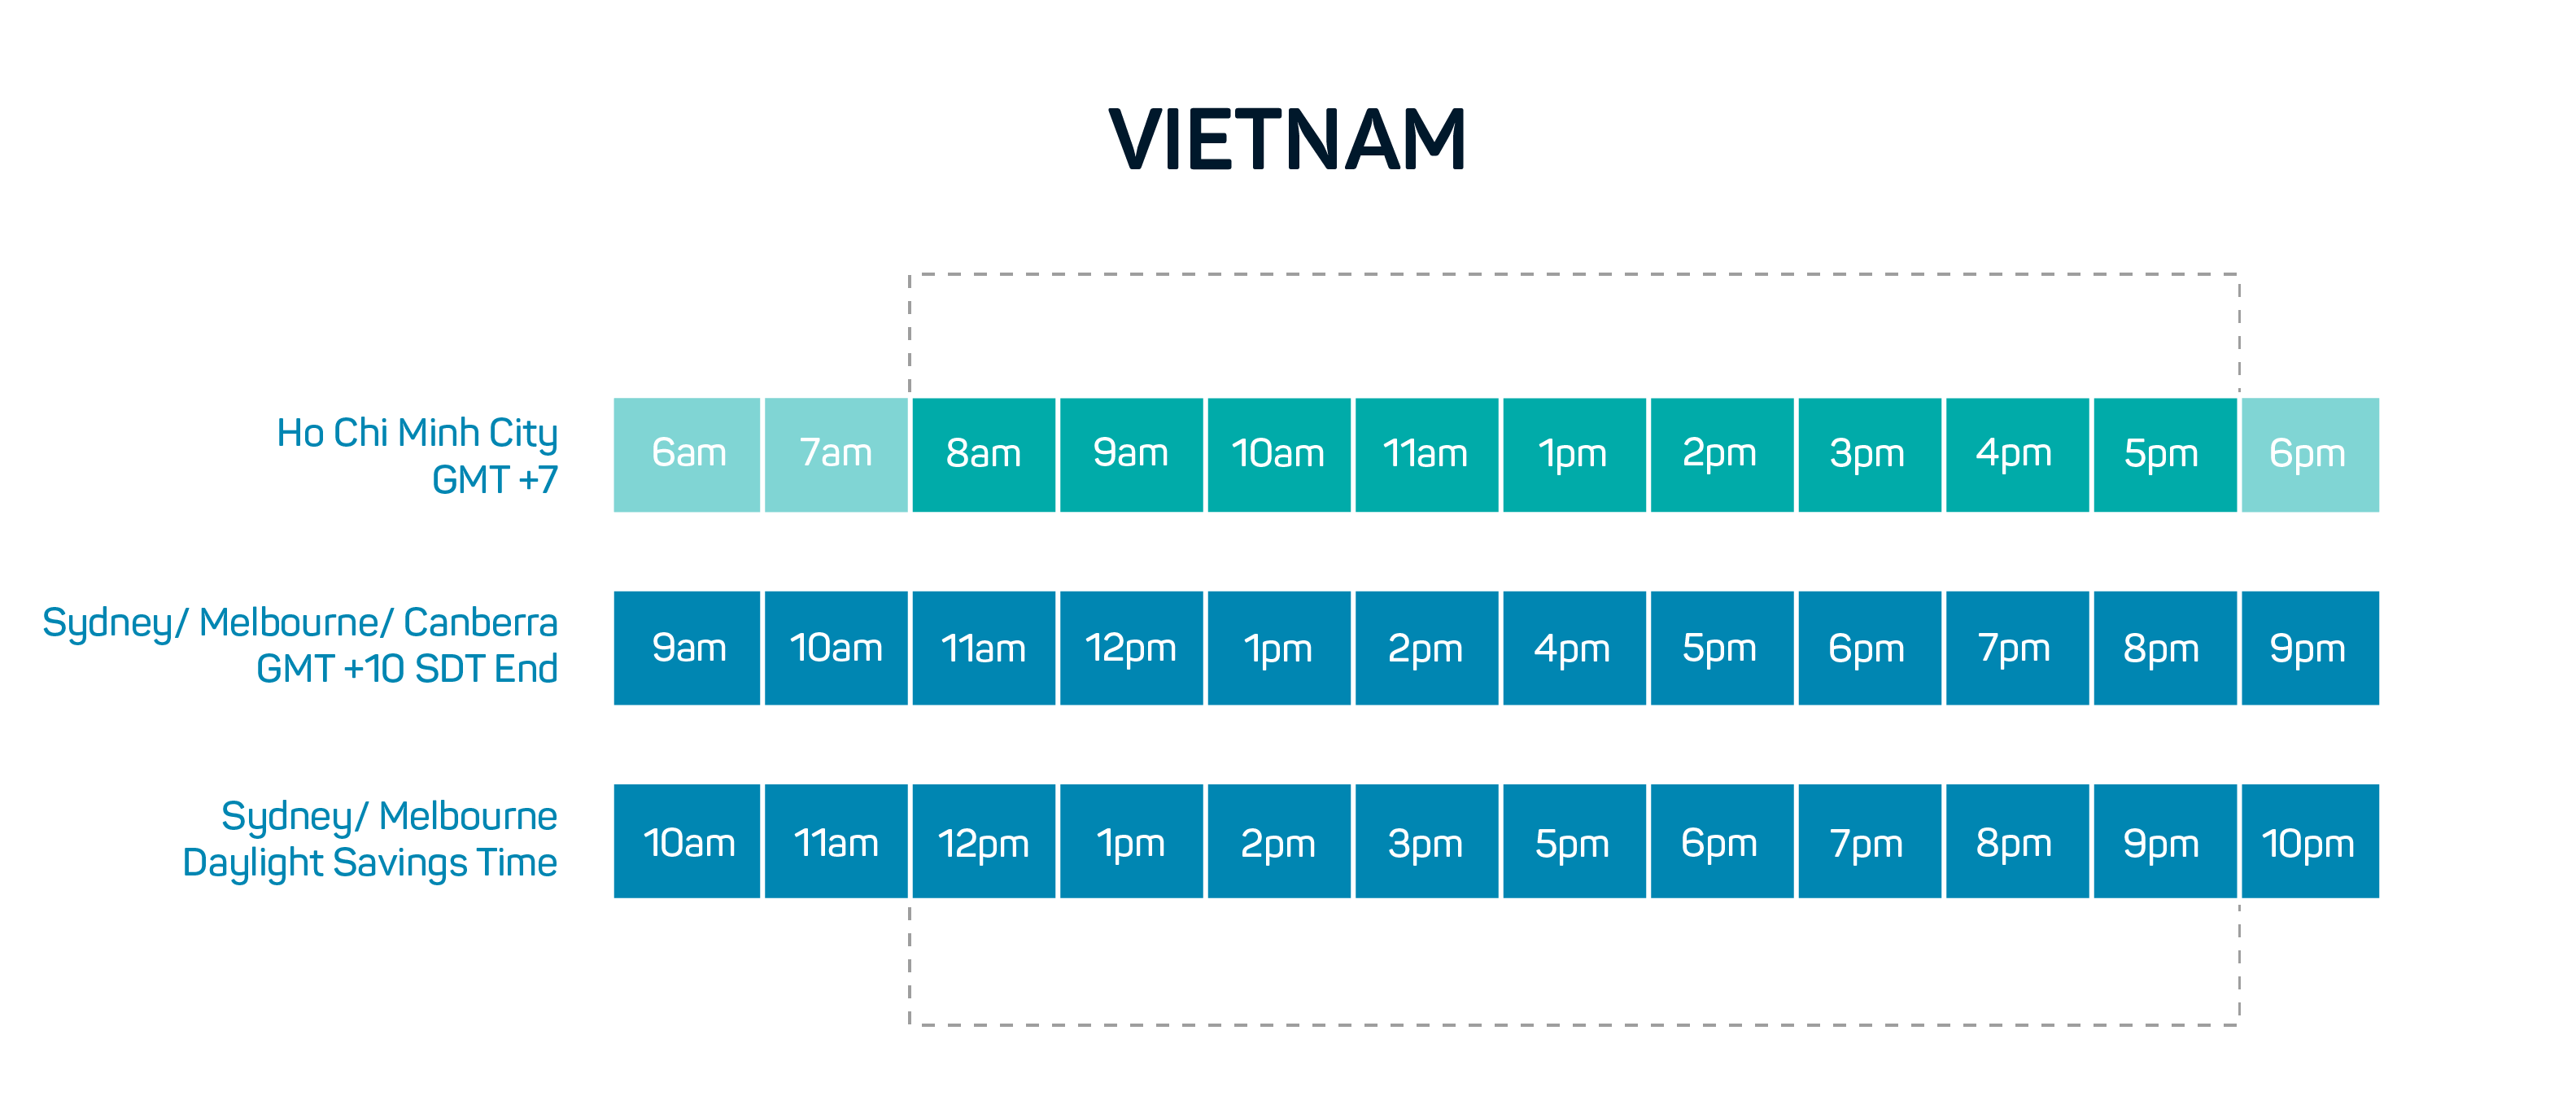 Vietnam time difference to Australia